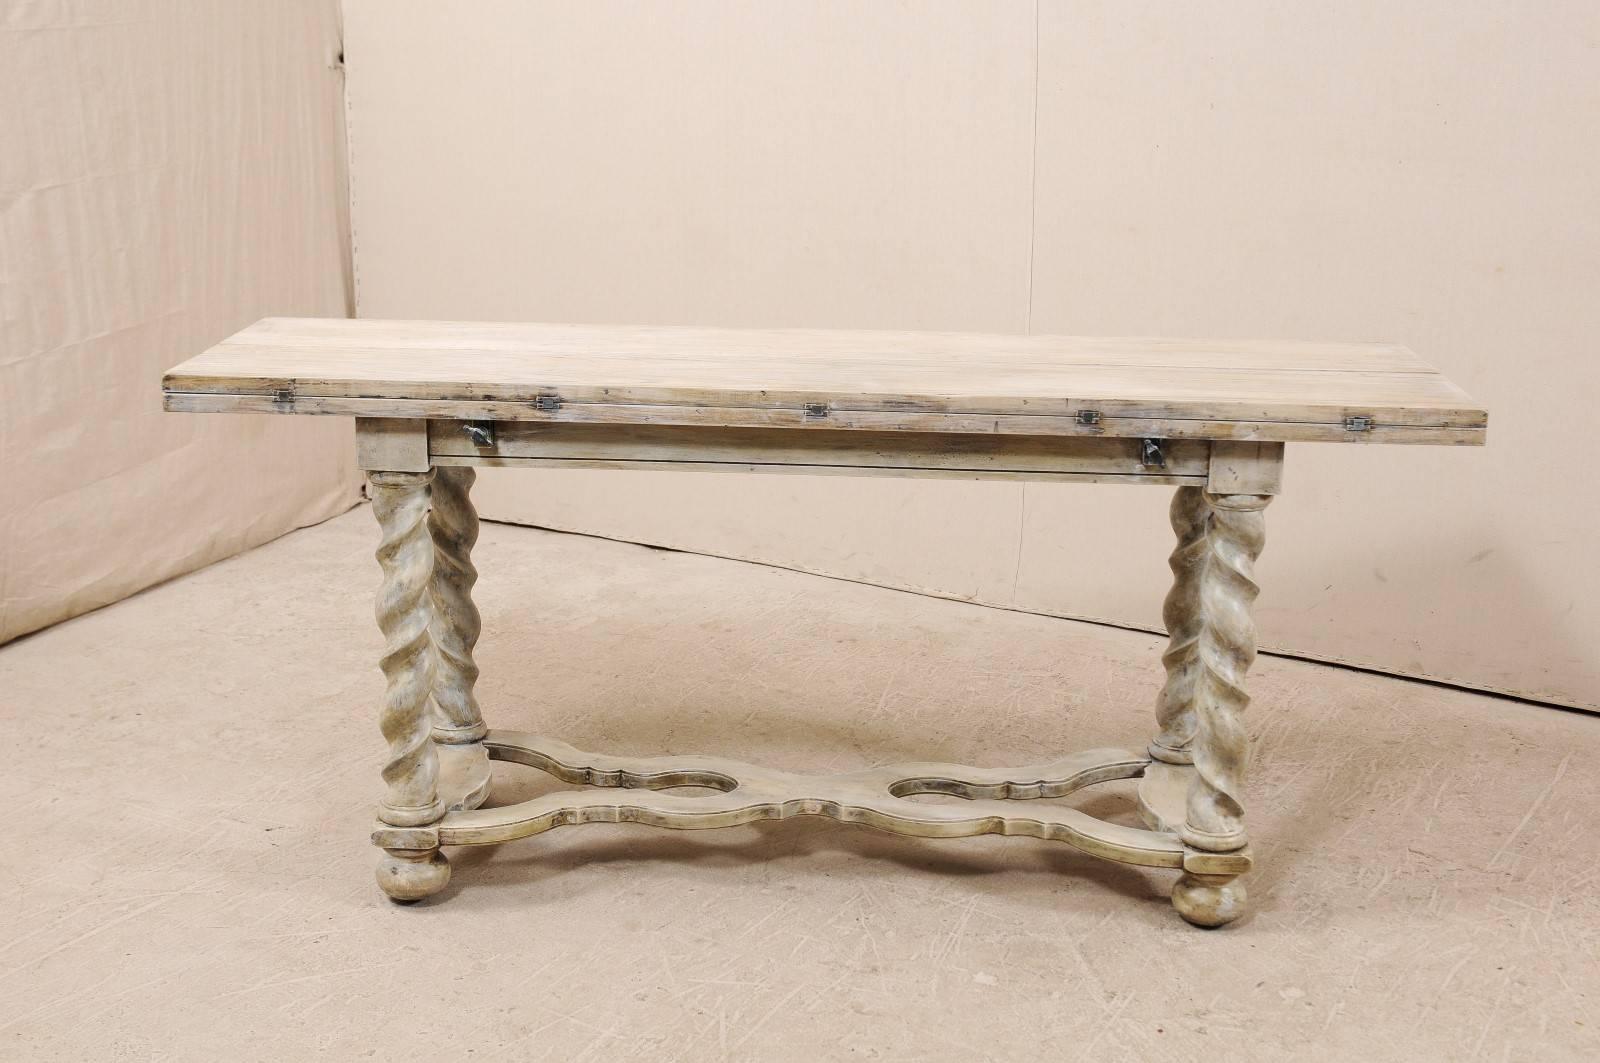 American Vintage Convertible Painted Wood Console Table in Light Wash with Twist Legs